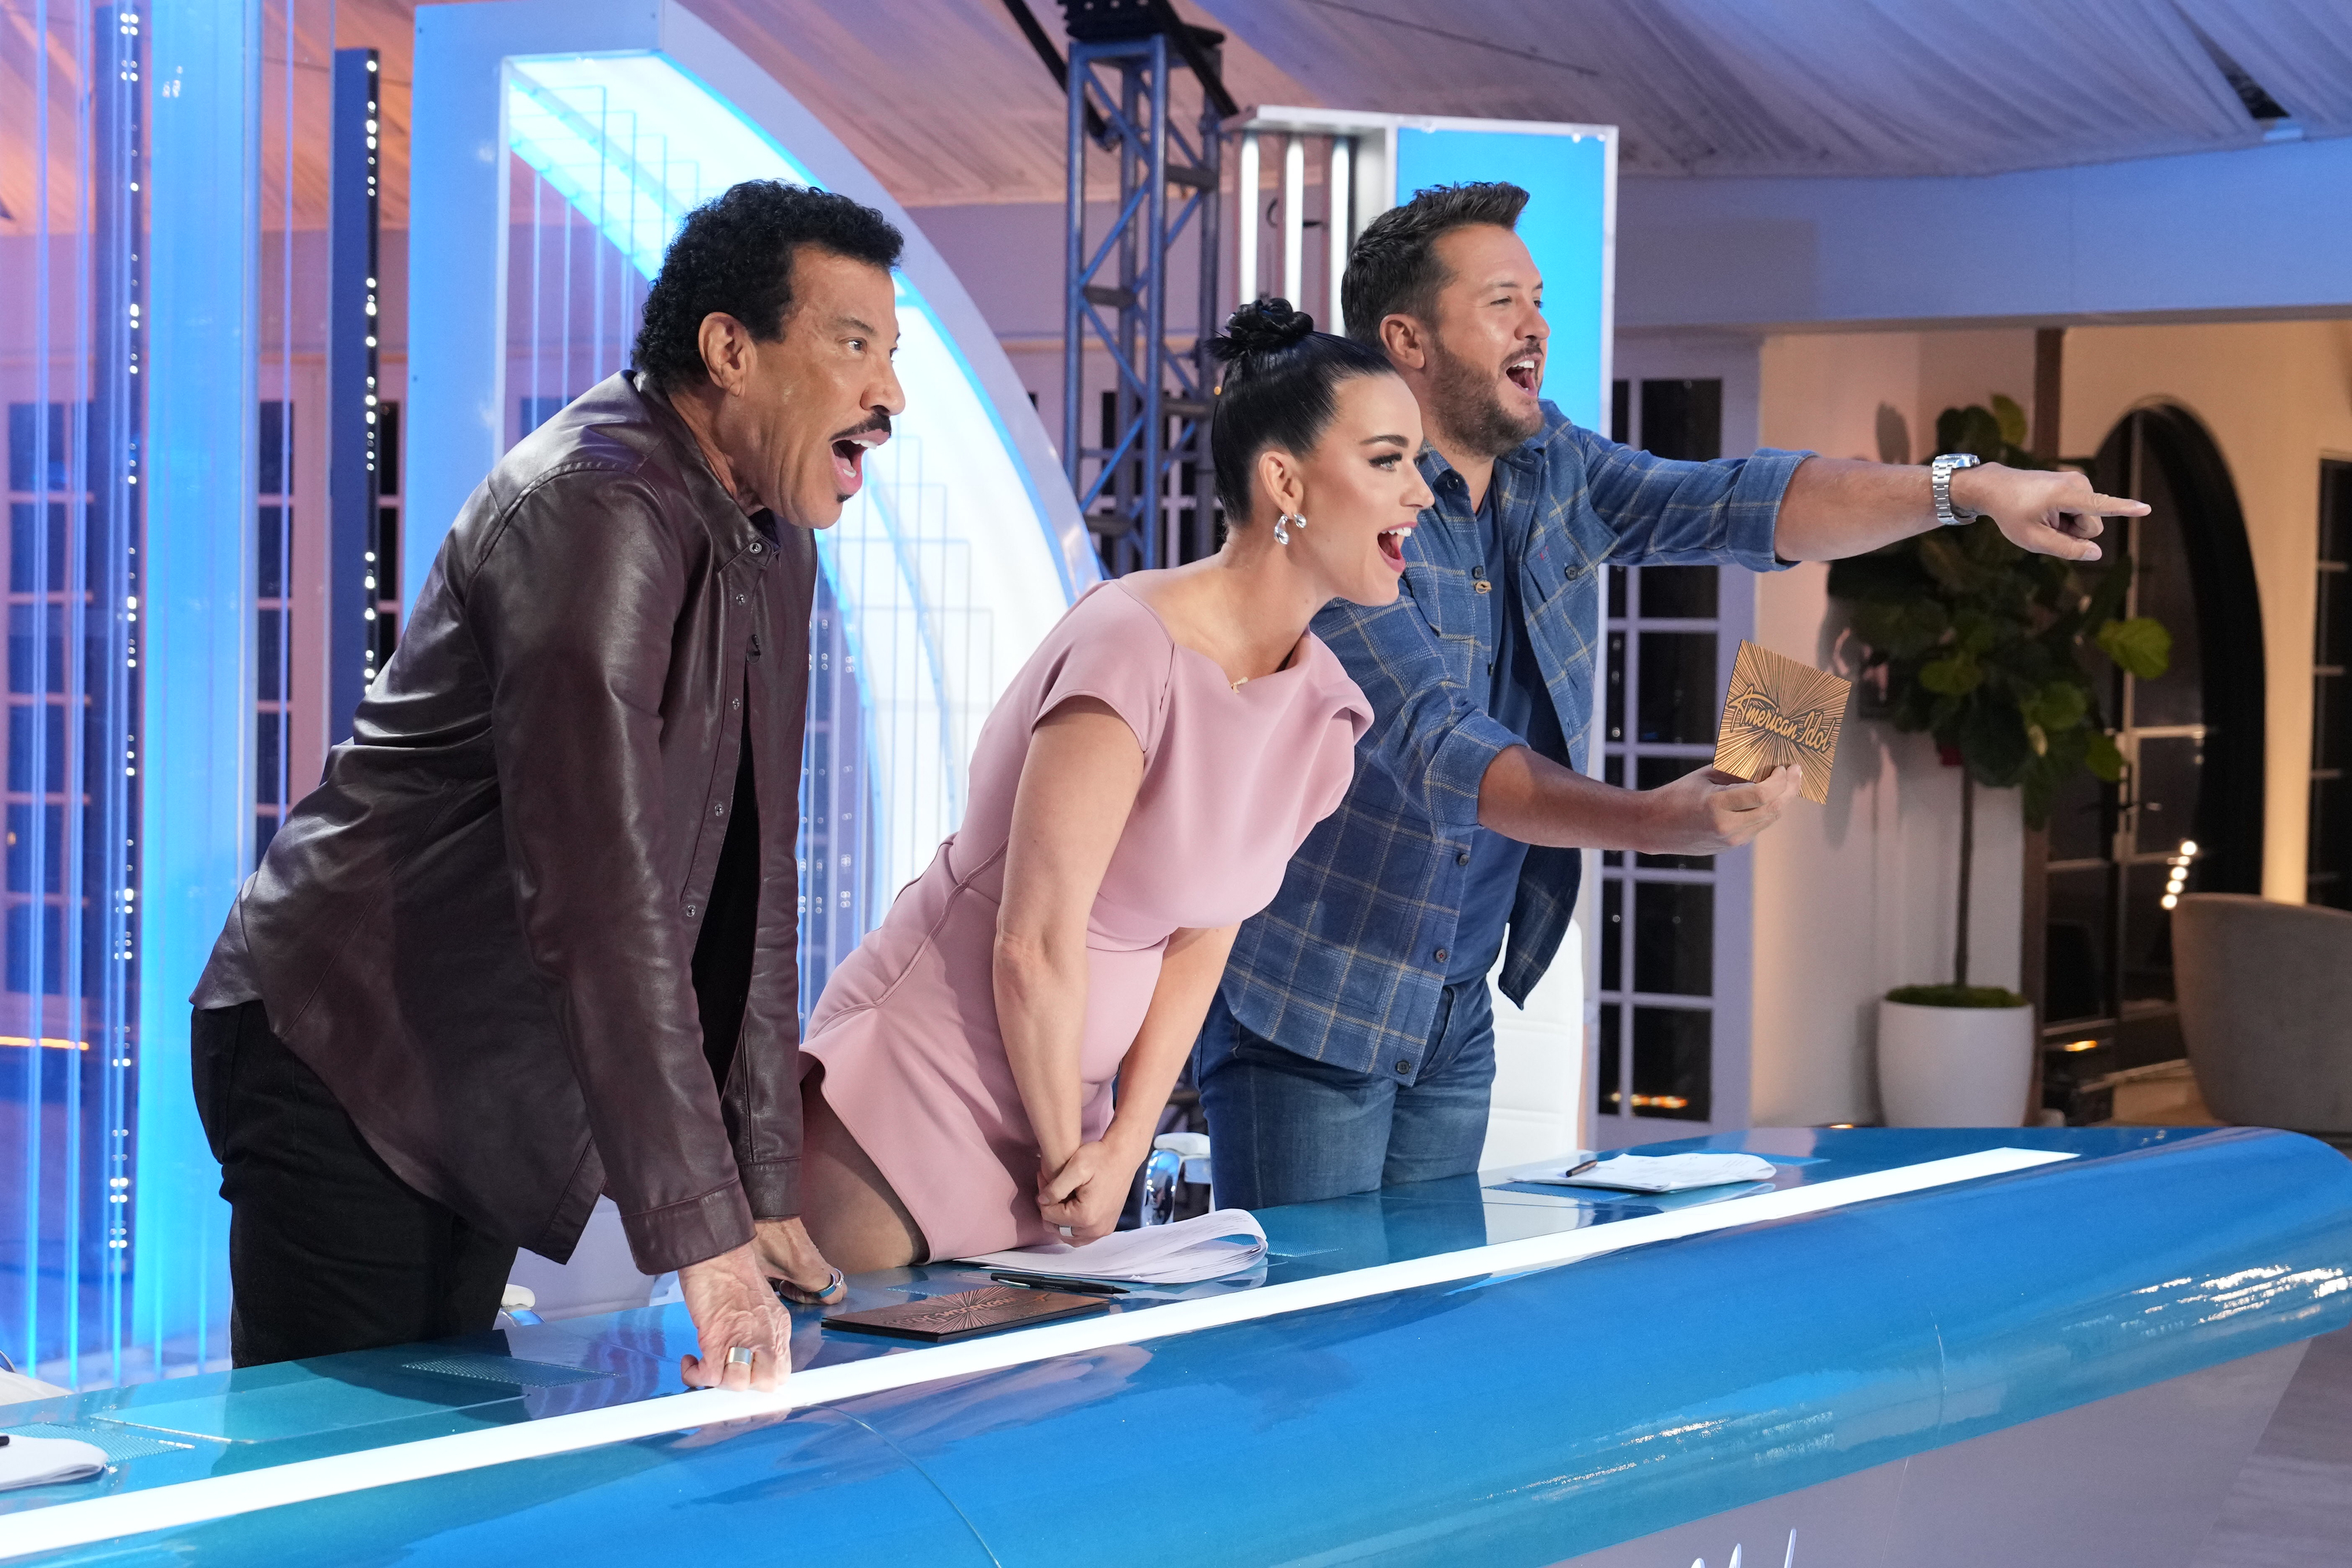 Luke Bryan, Katy, and Lionel Richie are the judges on American Idol